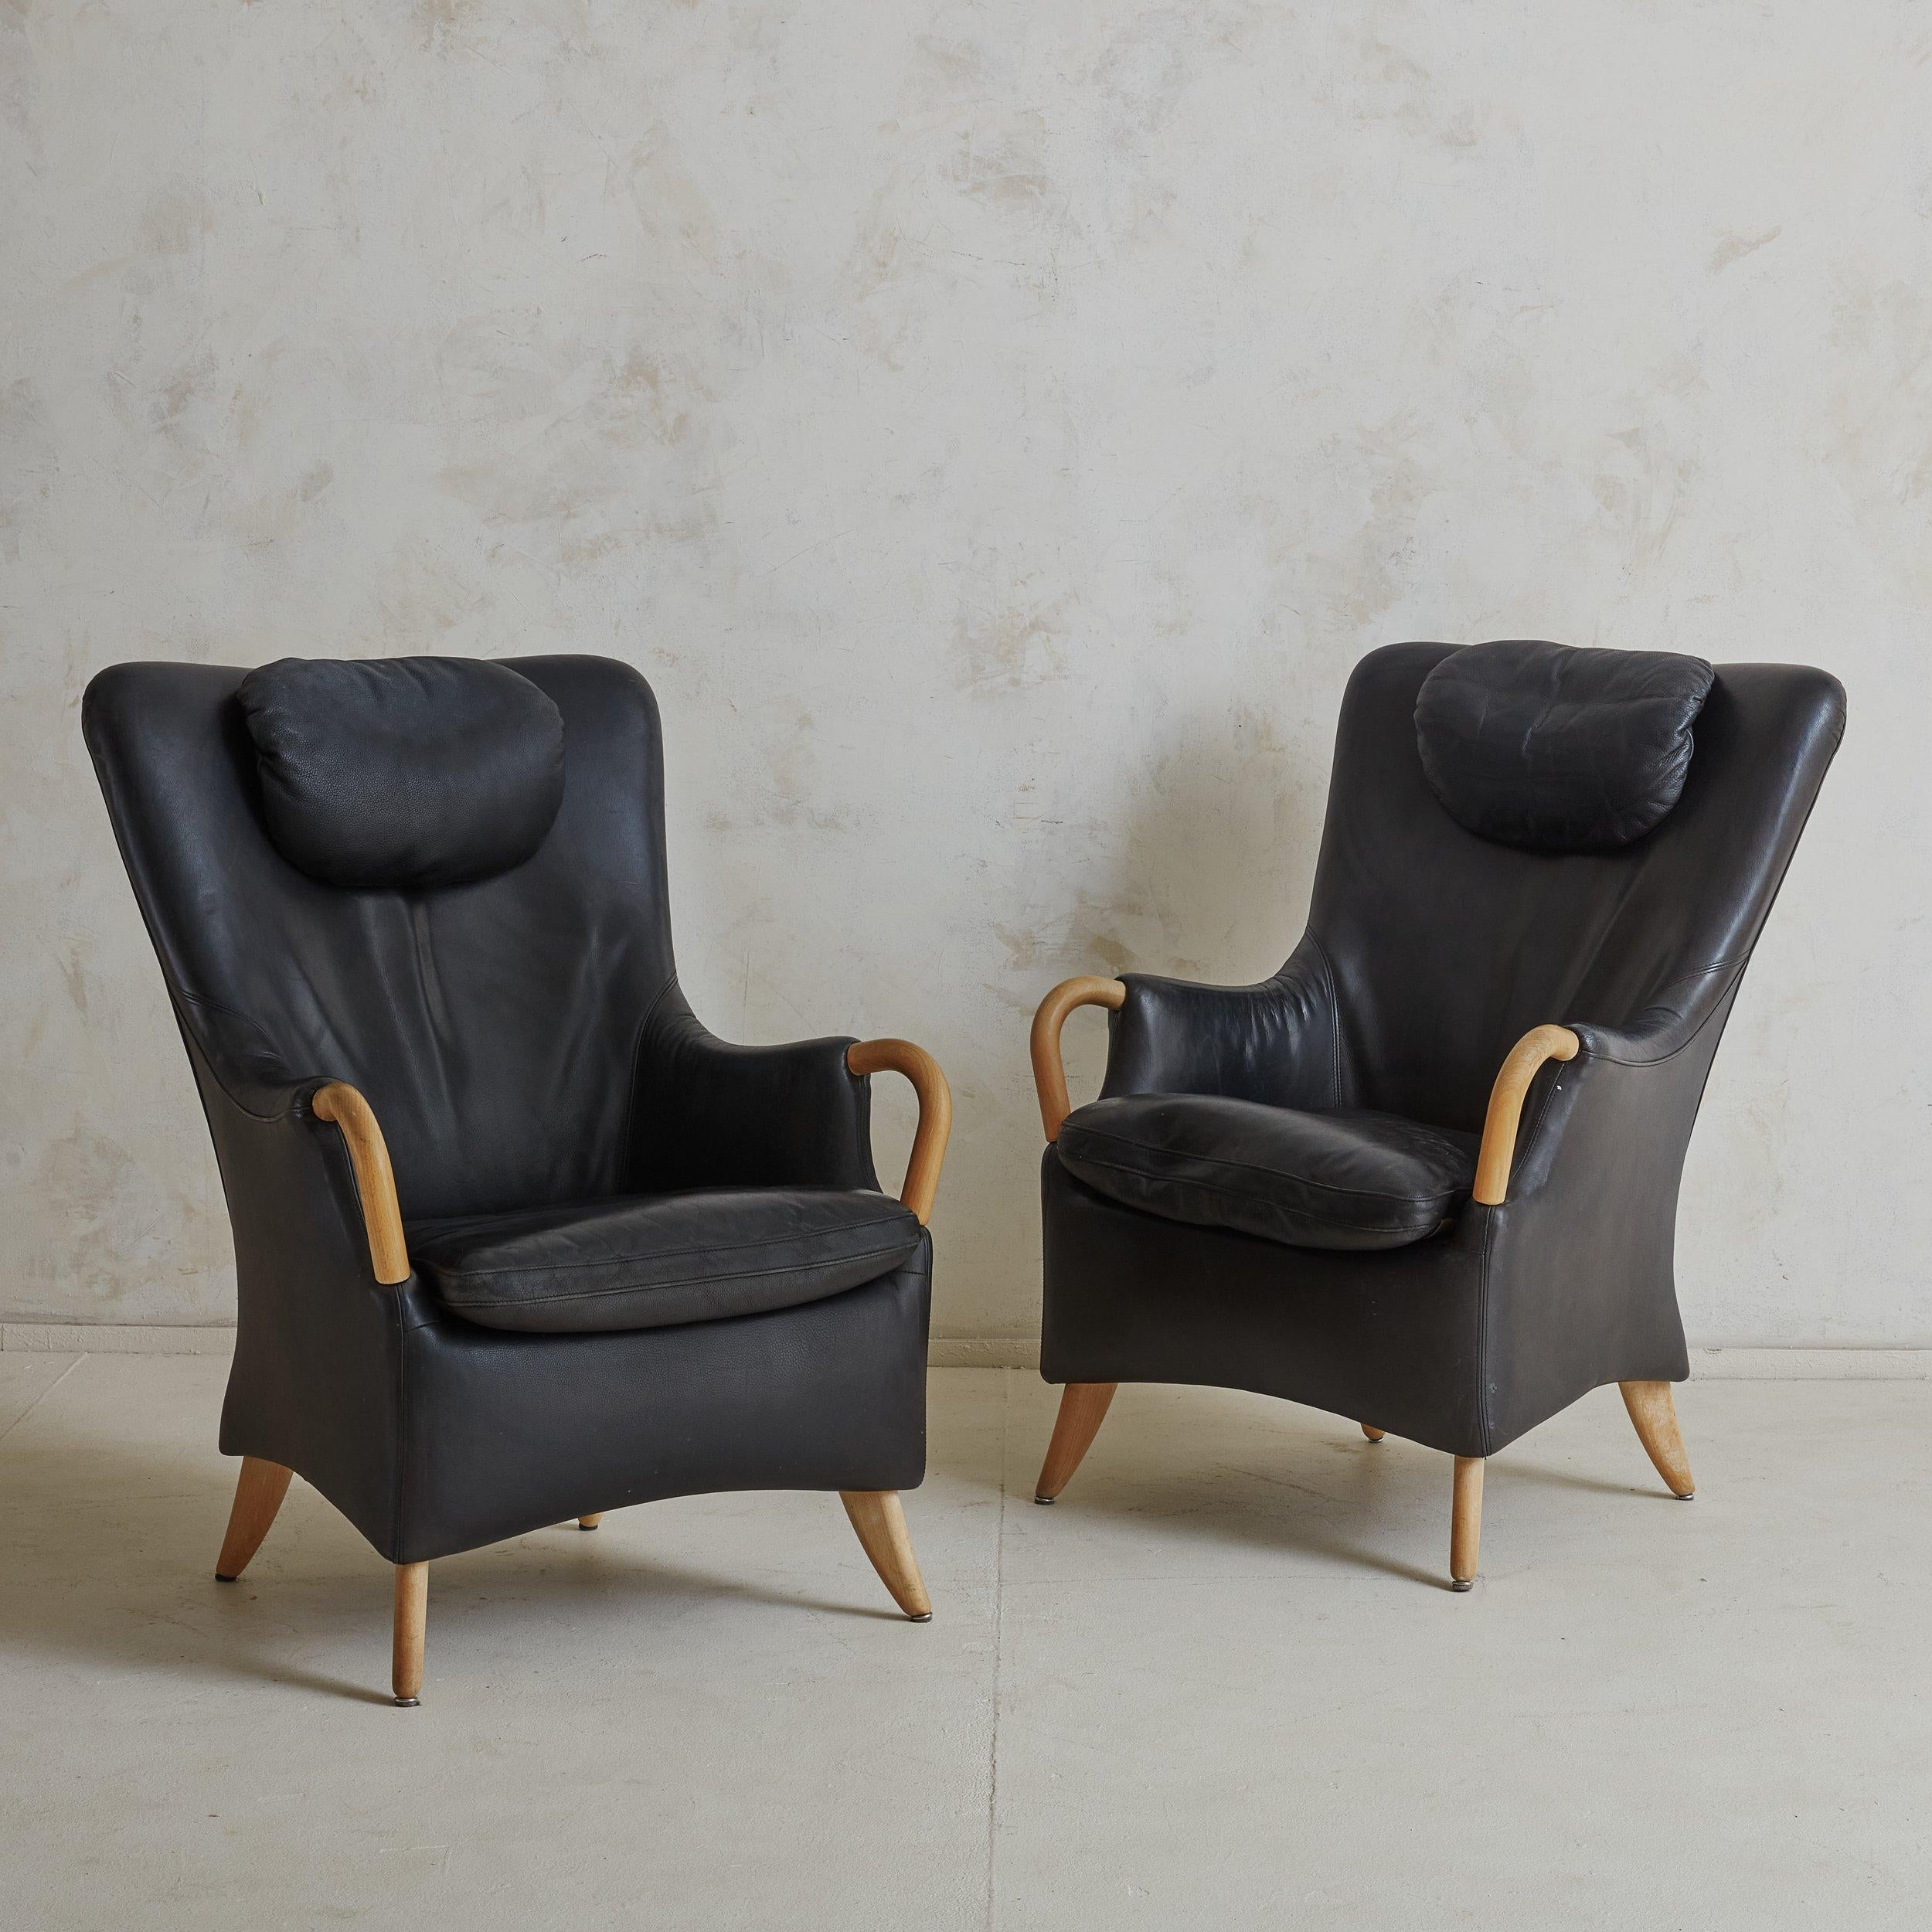 A pair of Danish black leather armchairs with matching footstool designed by Søren Nissen & Ebbe Gehl in 1984. These Scandinavian Modern armchairs feature sculptural, wingback frames and all three pieces are composed of blonde beech wood and